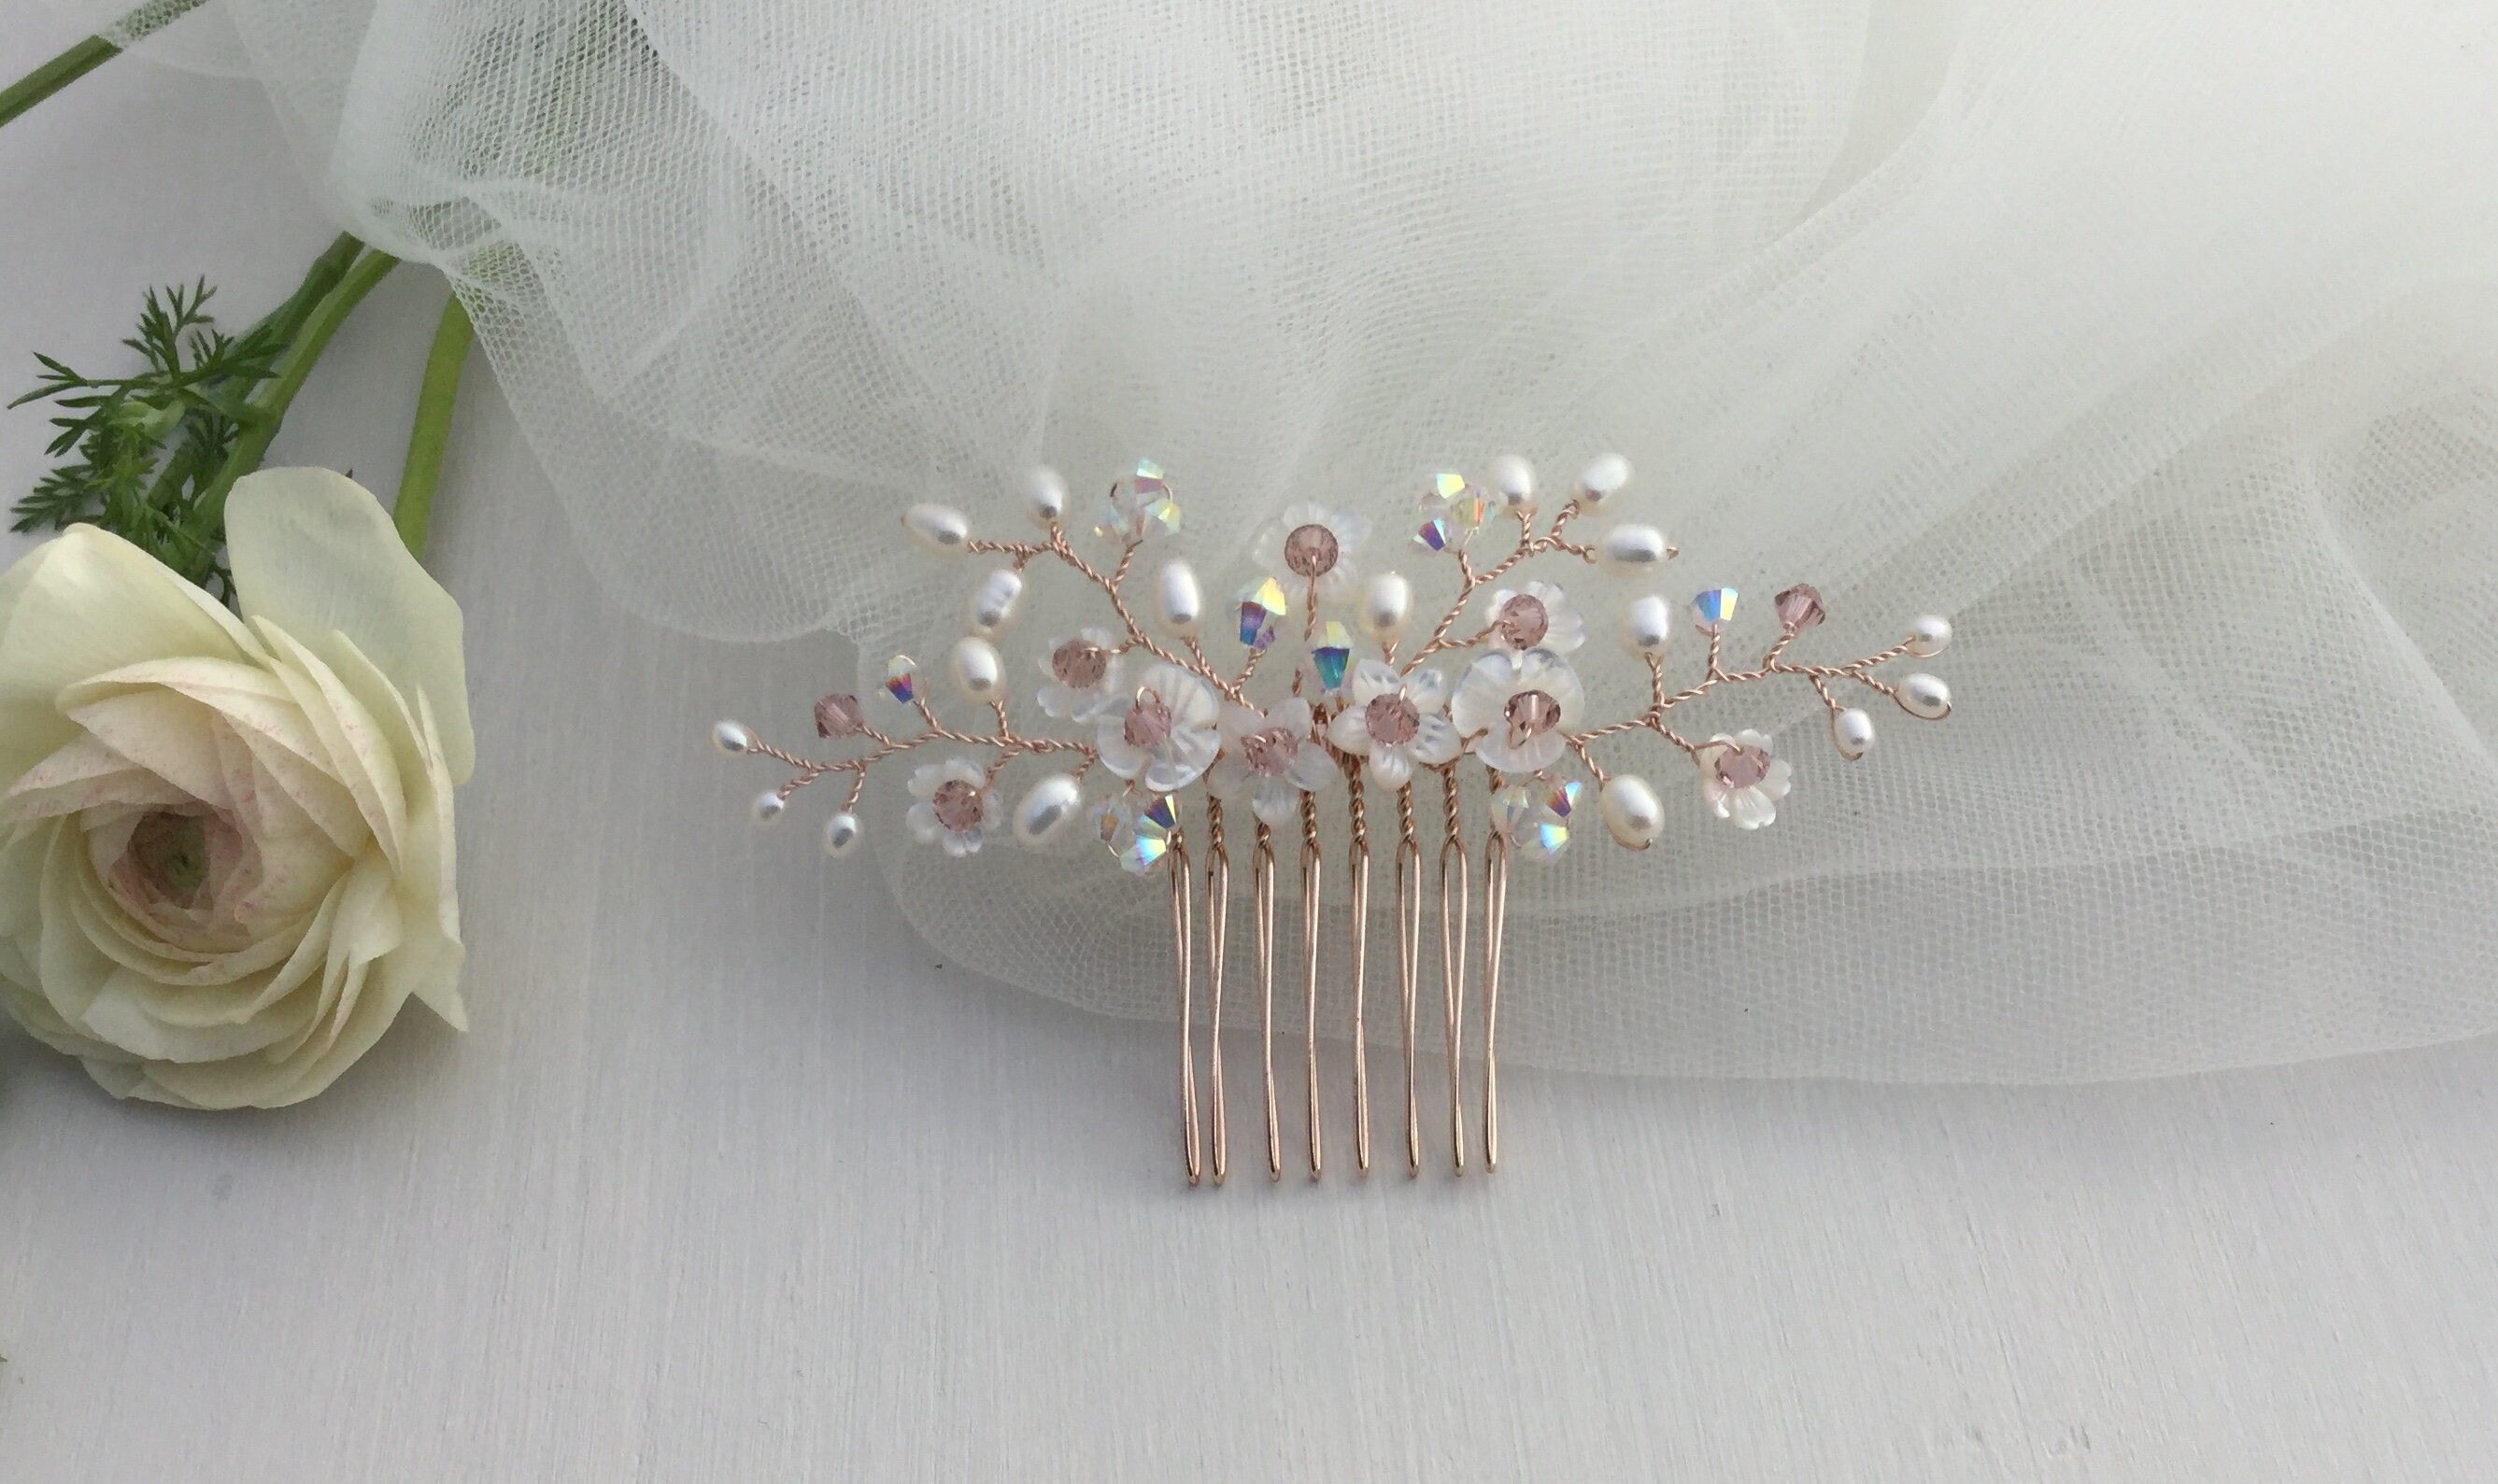 1. Rose Gold and Blue Hair Comb by Lulu Splendor - wide 11